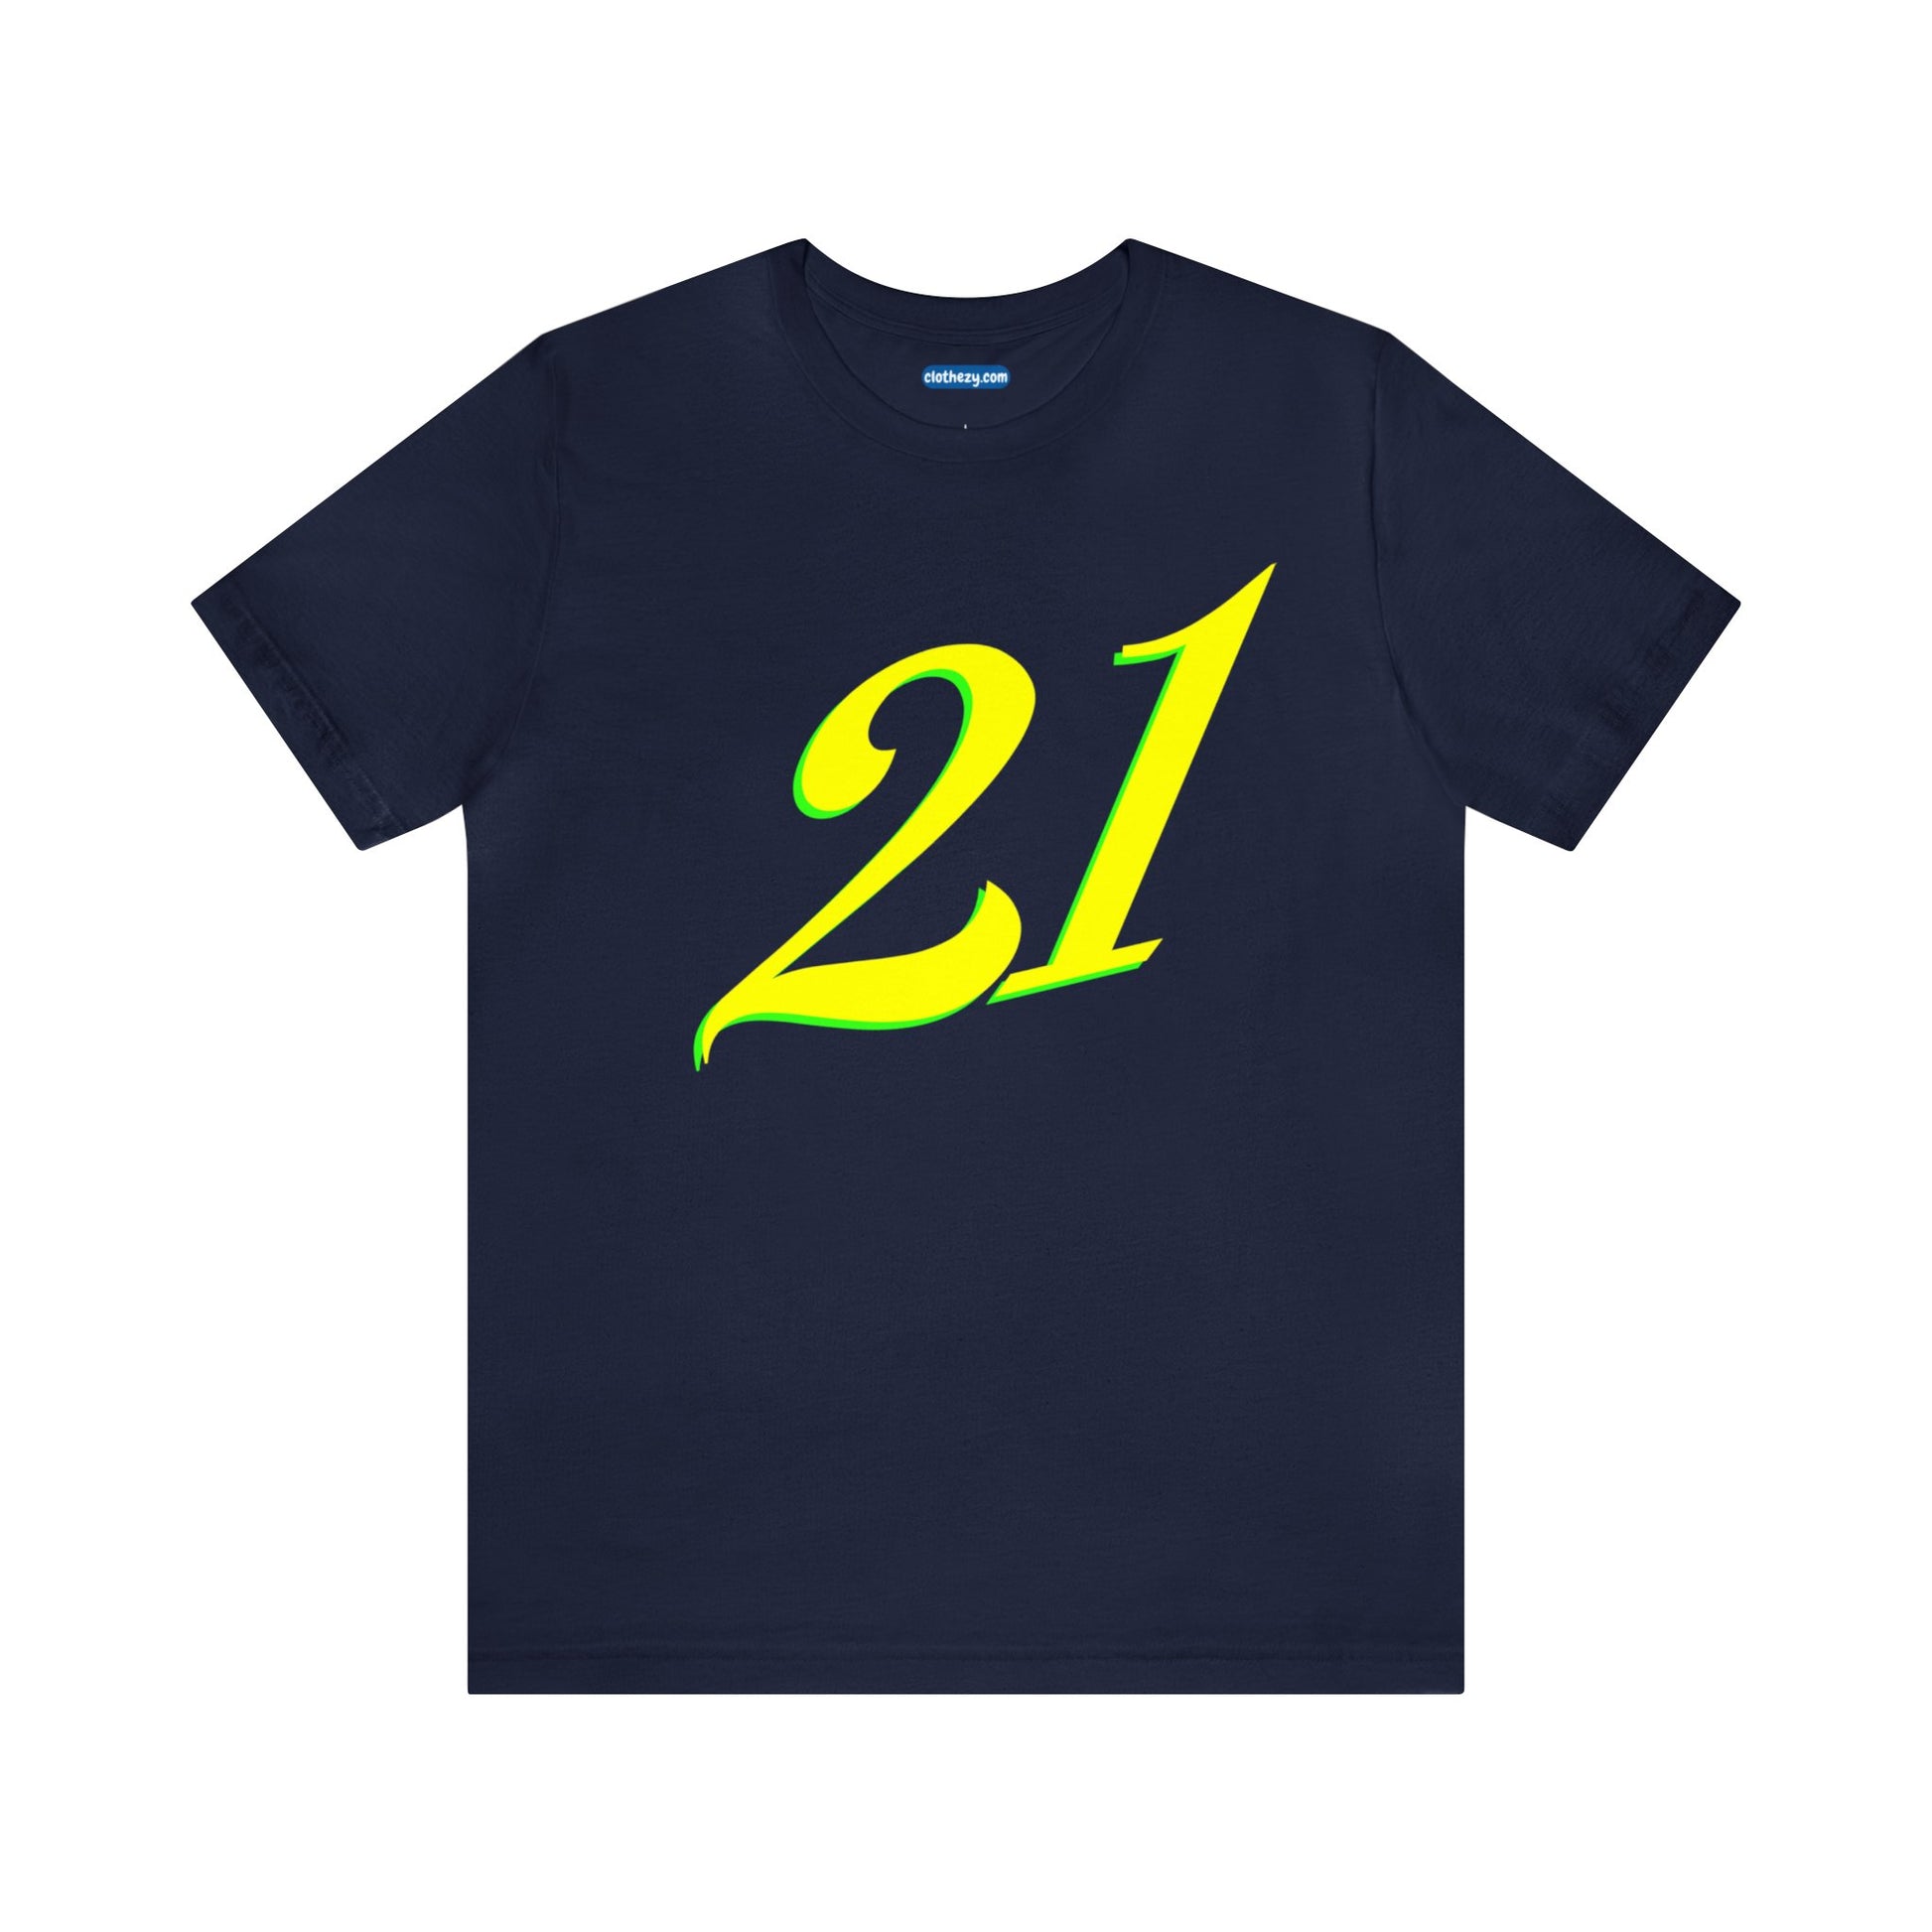 Number 21 Design - Soft Cotton Tee for birthdays and celebrations, Gift for friends and family, Multiple Options by clothezy.com in Orange Size Small - Buy Now